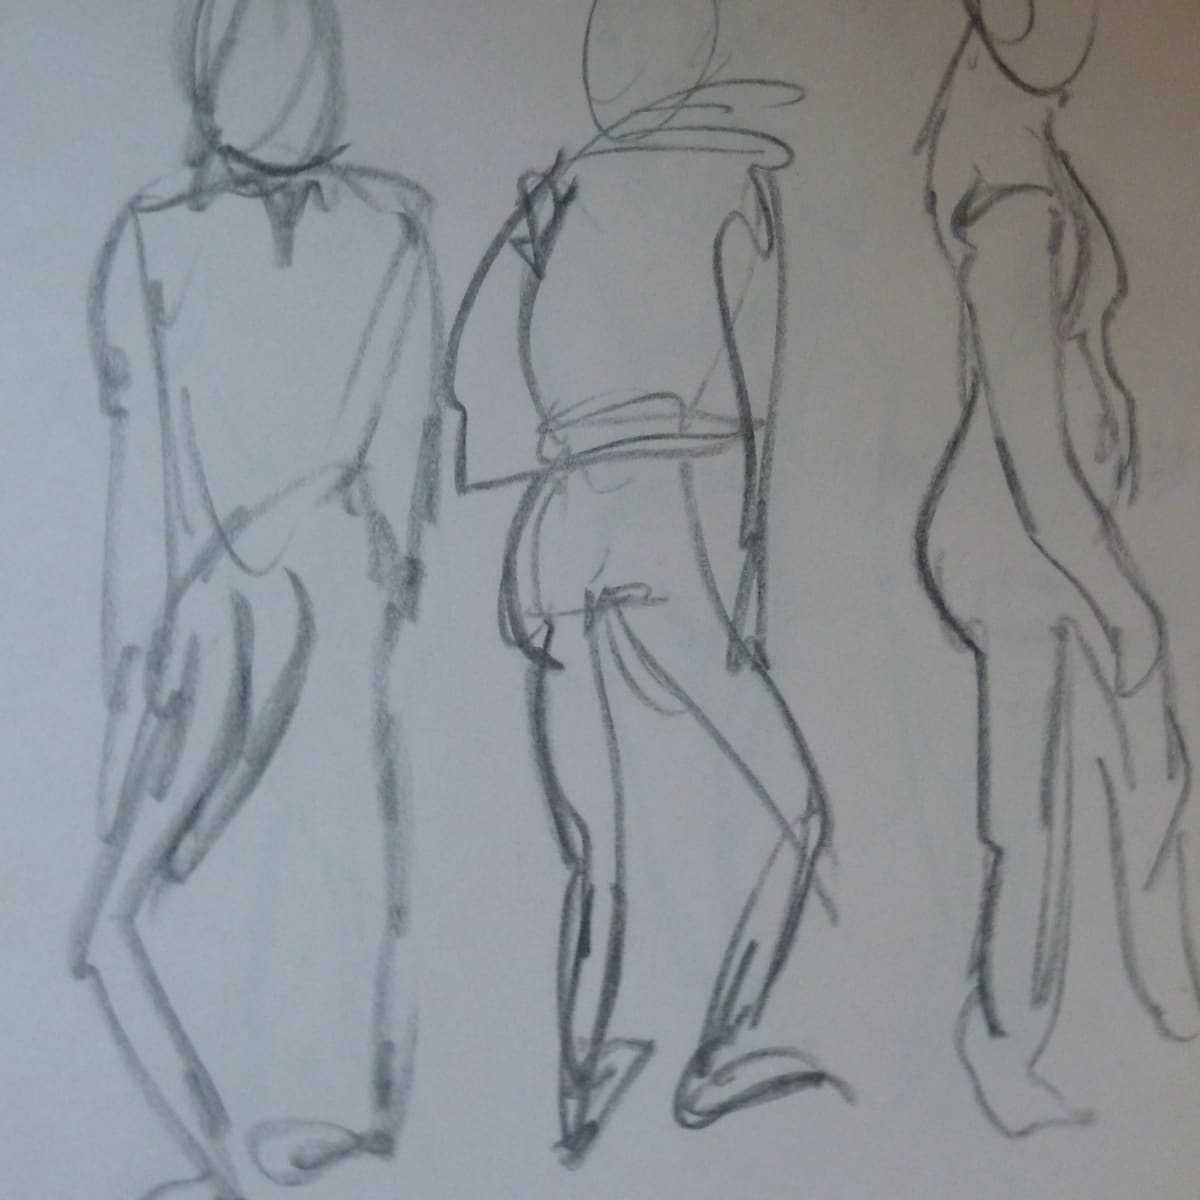 Anatomy TRACK: Lesson 1, Gesture Drawings of Figures · Art Prof